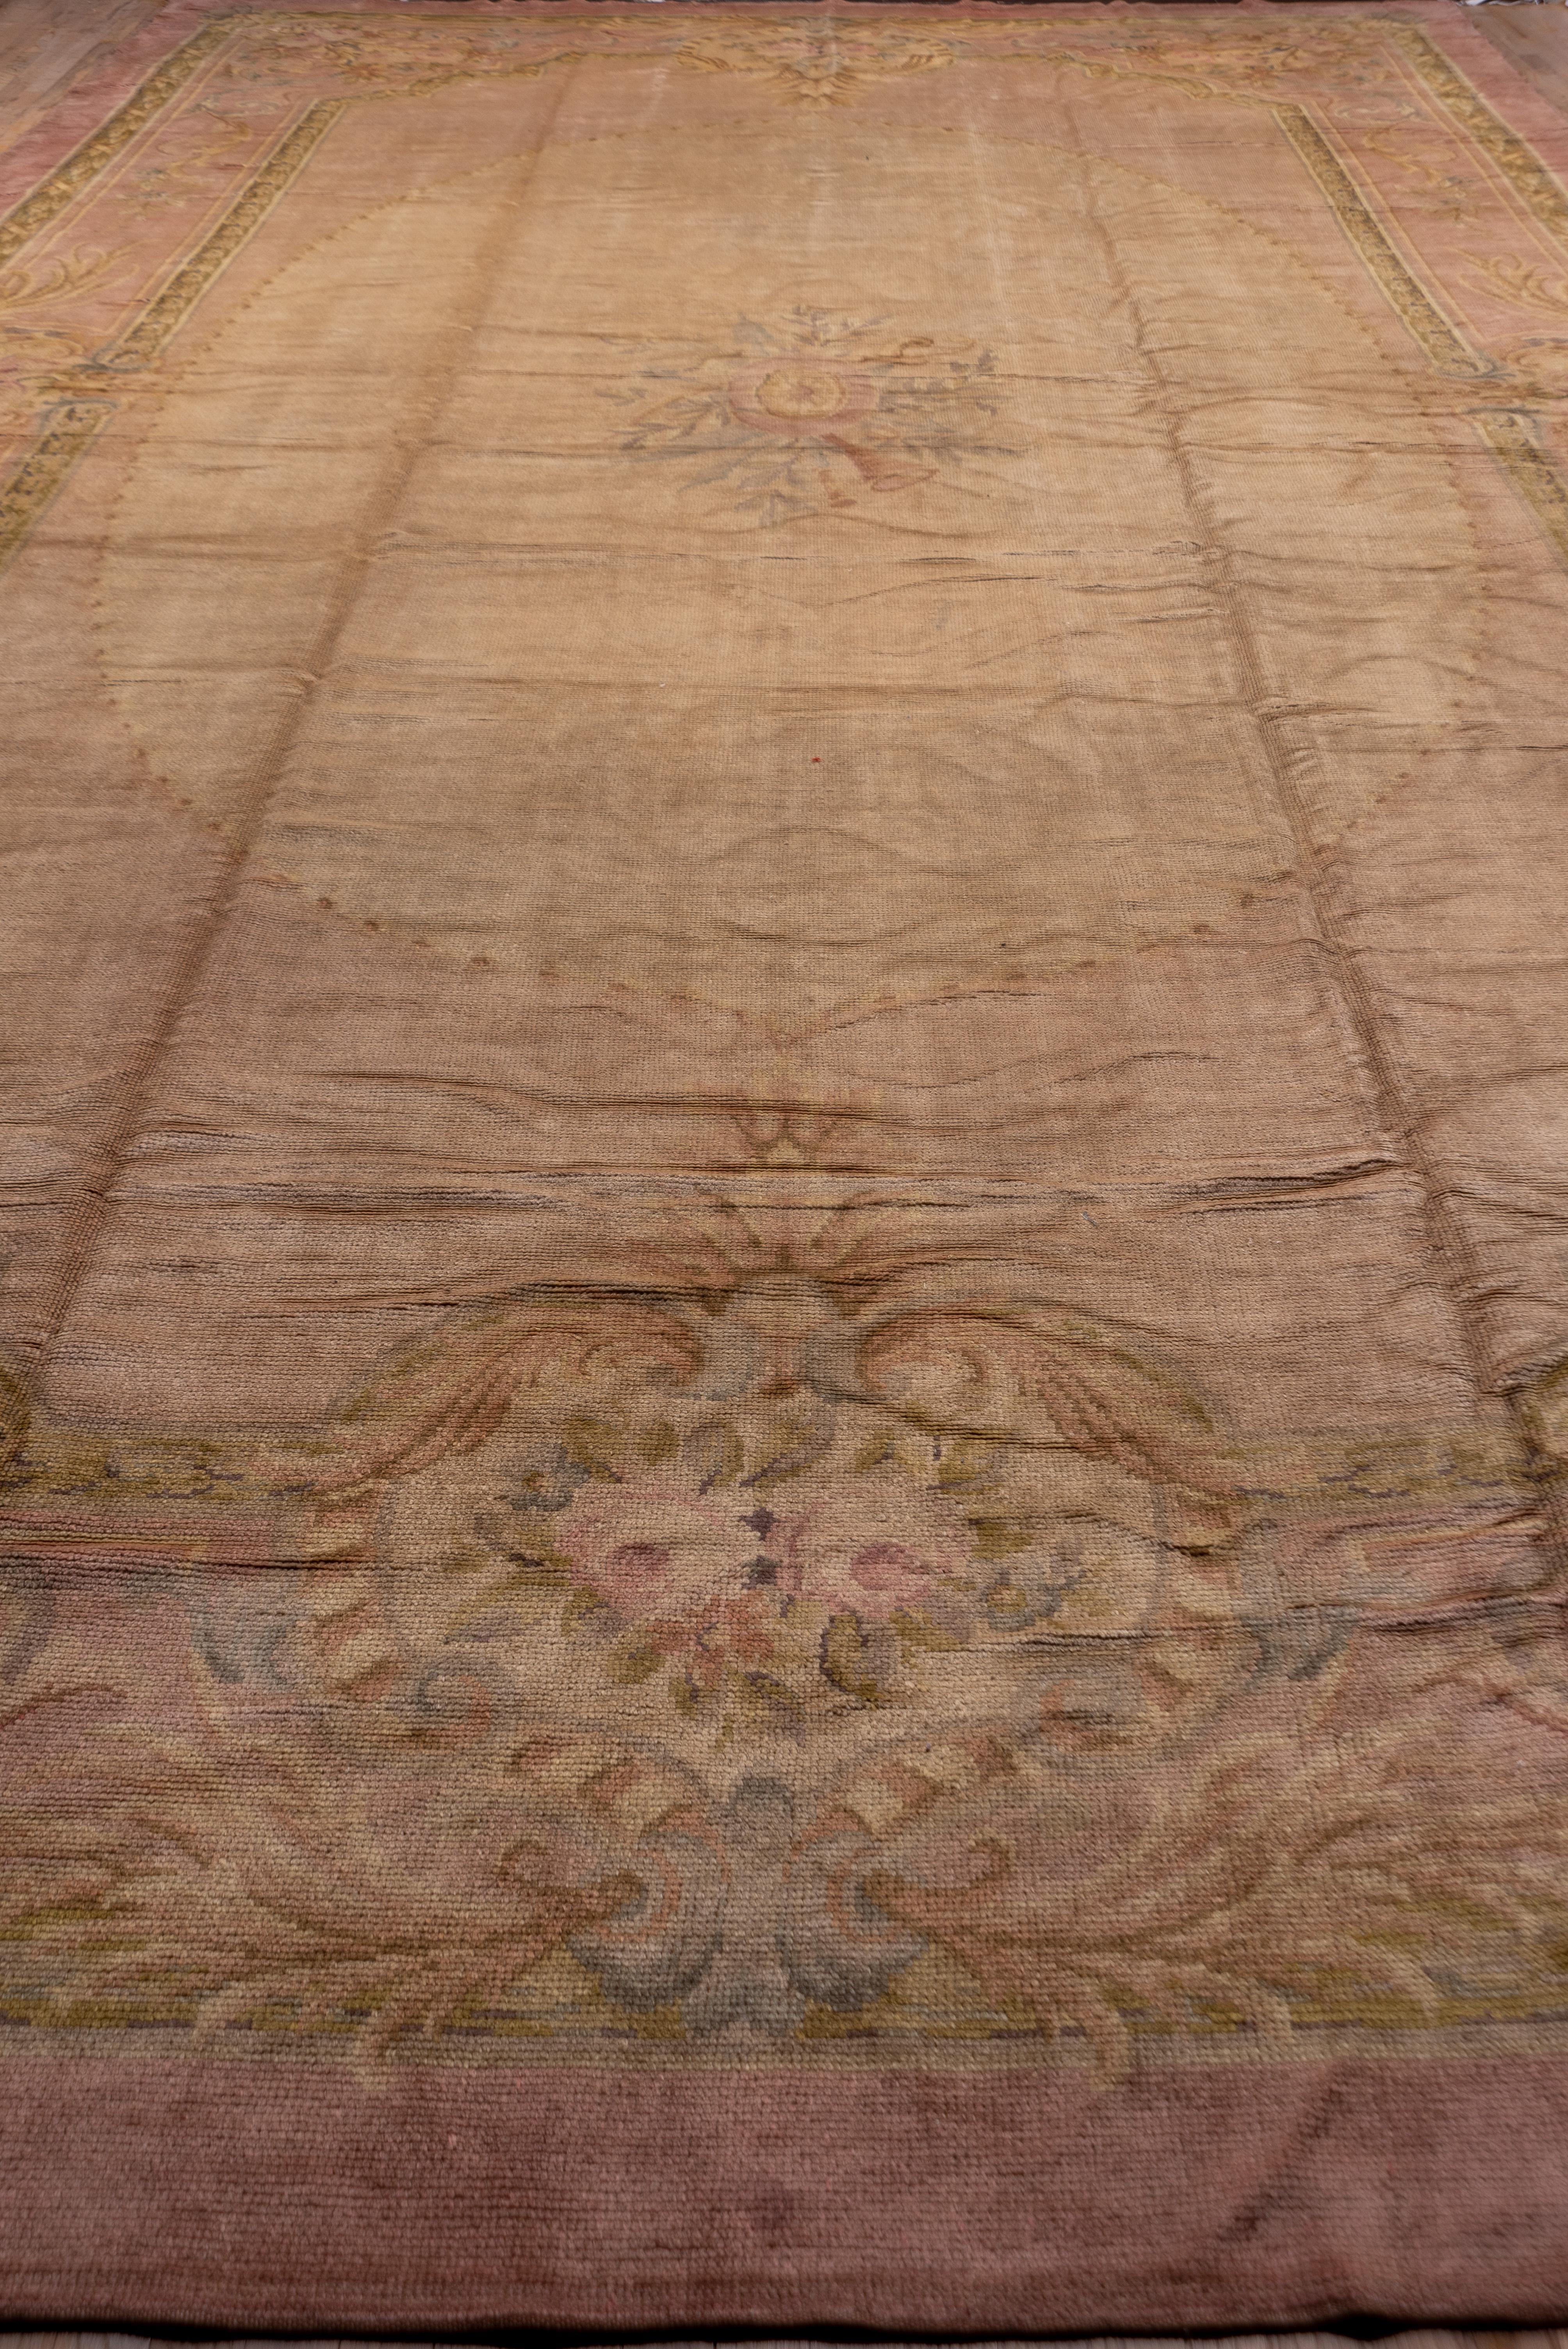 Antique French Savonnerie Mansion Carpet, Rococo Style, circa 1910s For Sale 3